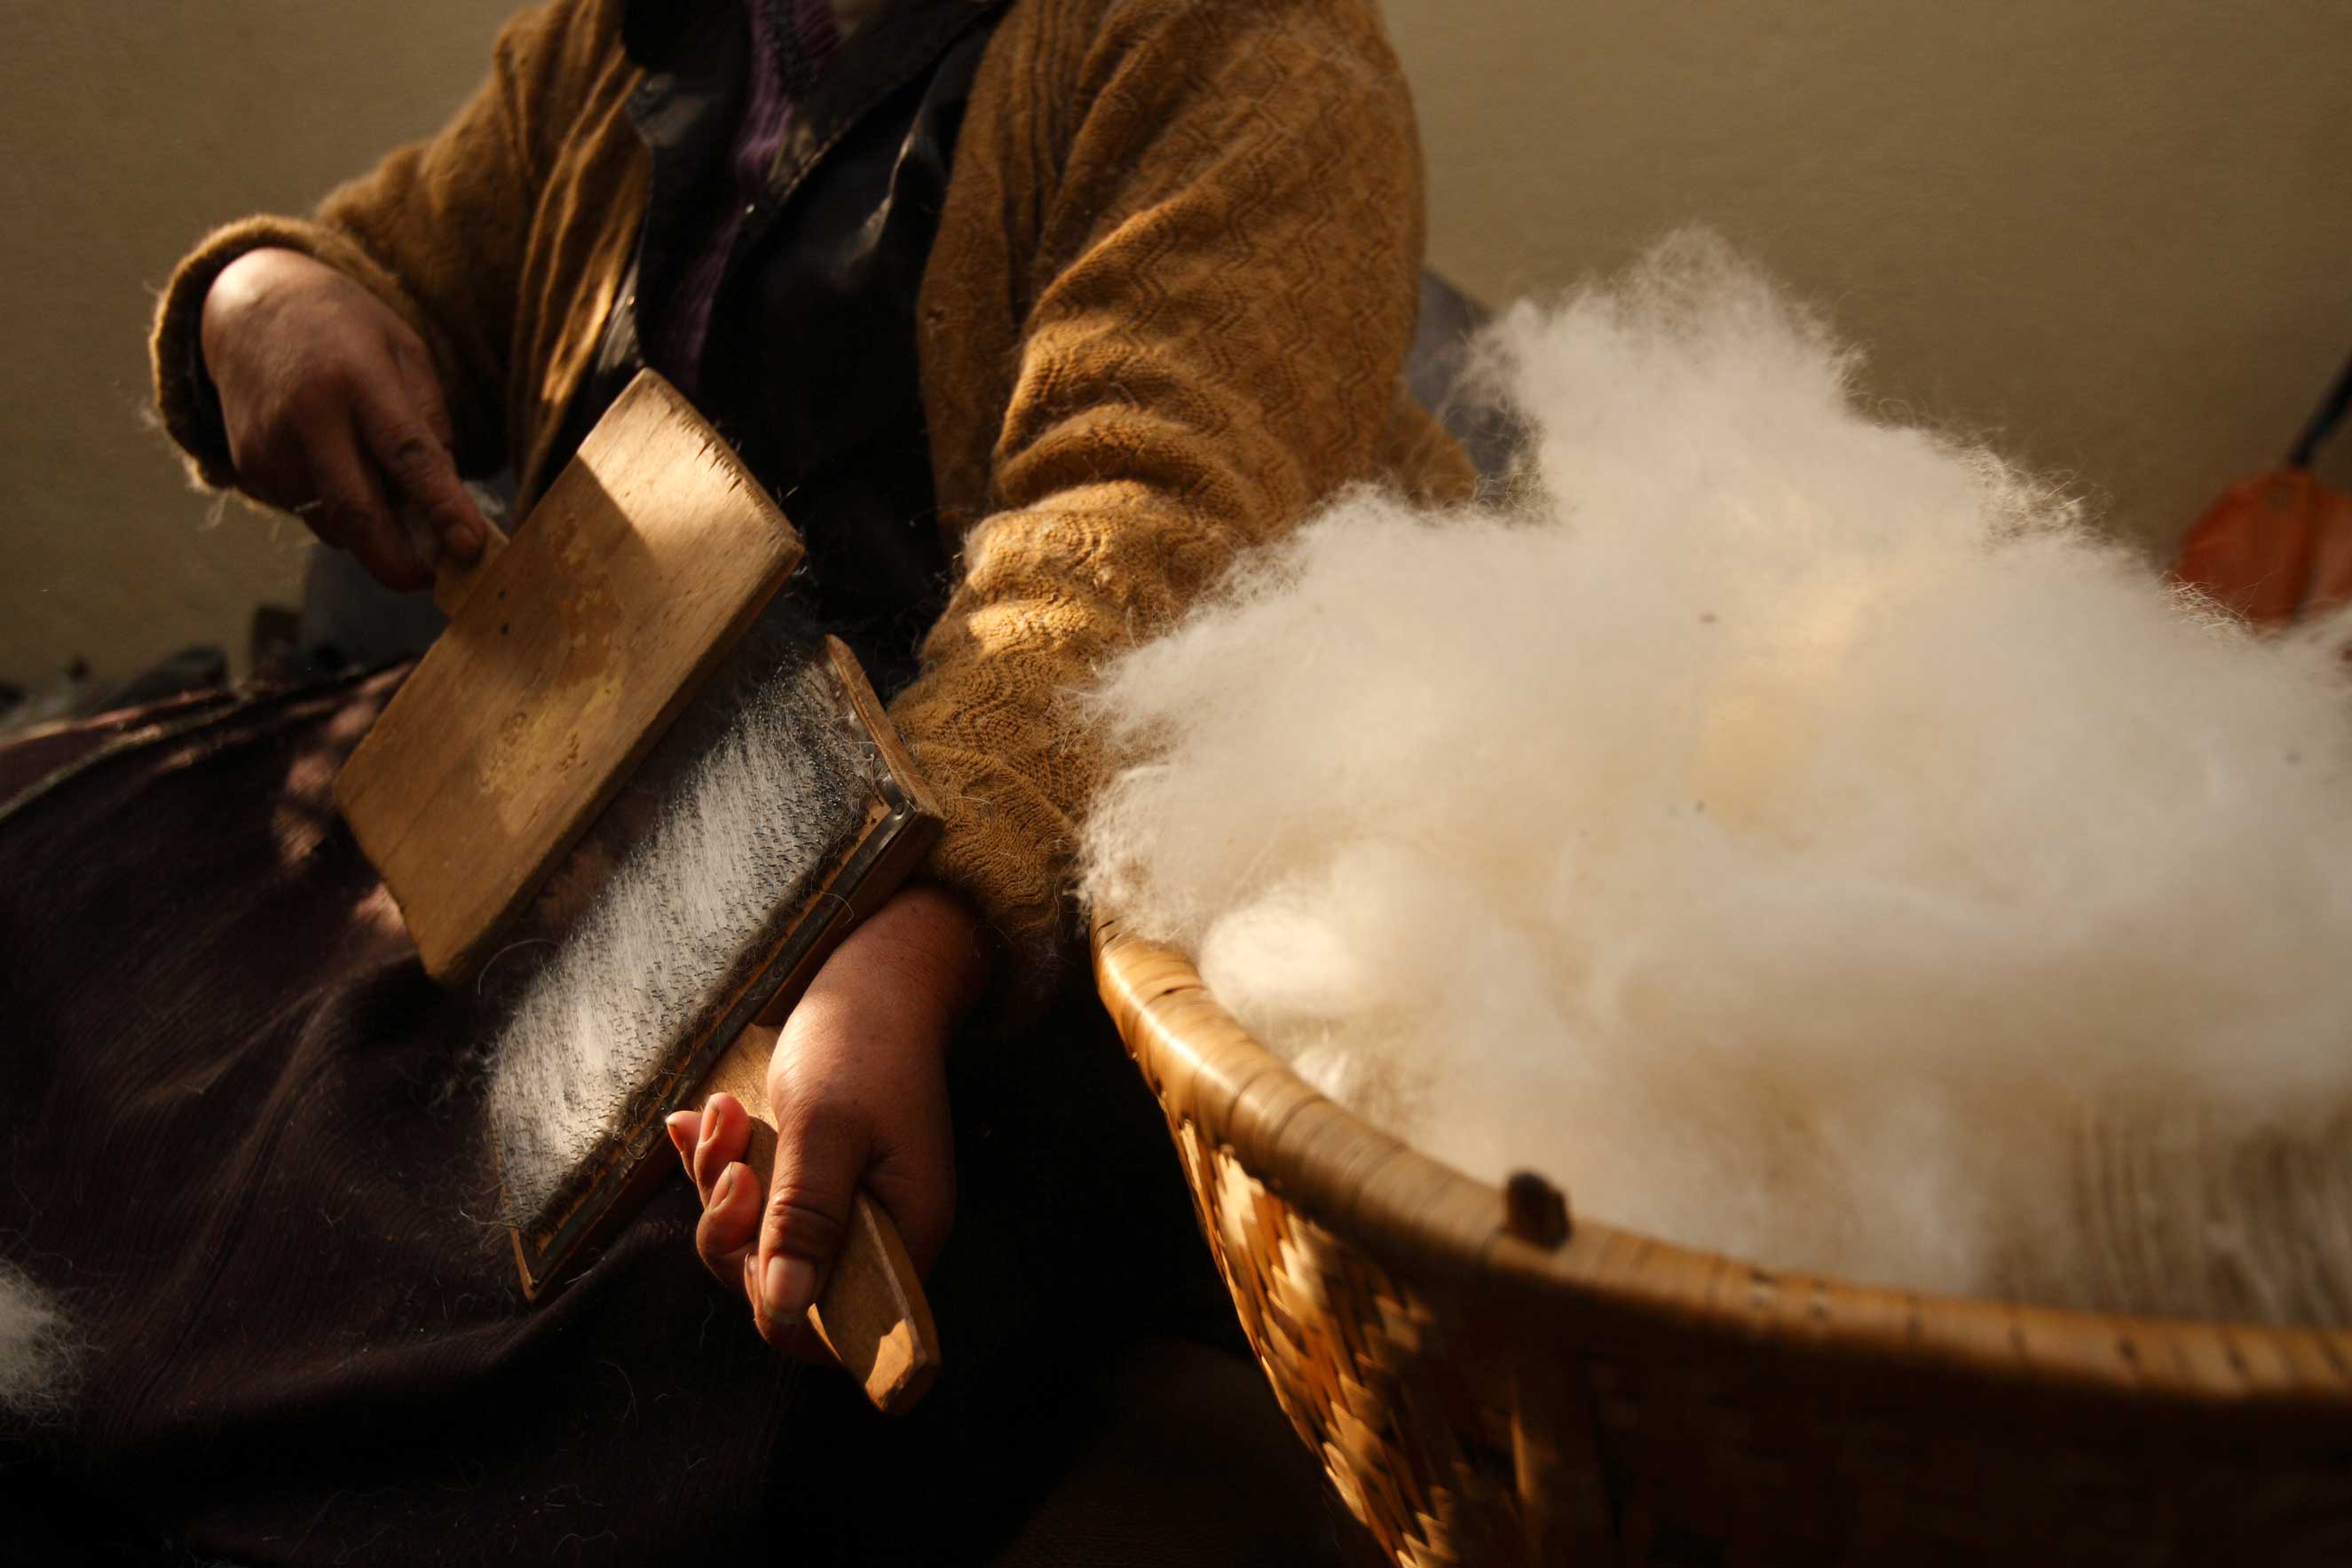 A lady (face not pictured) in a yellow knitted cardigan, brushes white wool between two brushes, with a basket of white wool sitting in foreground.